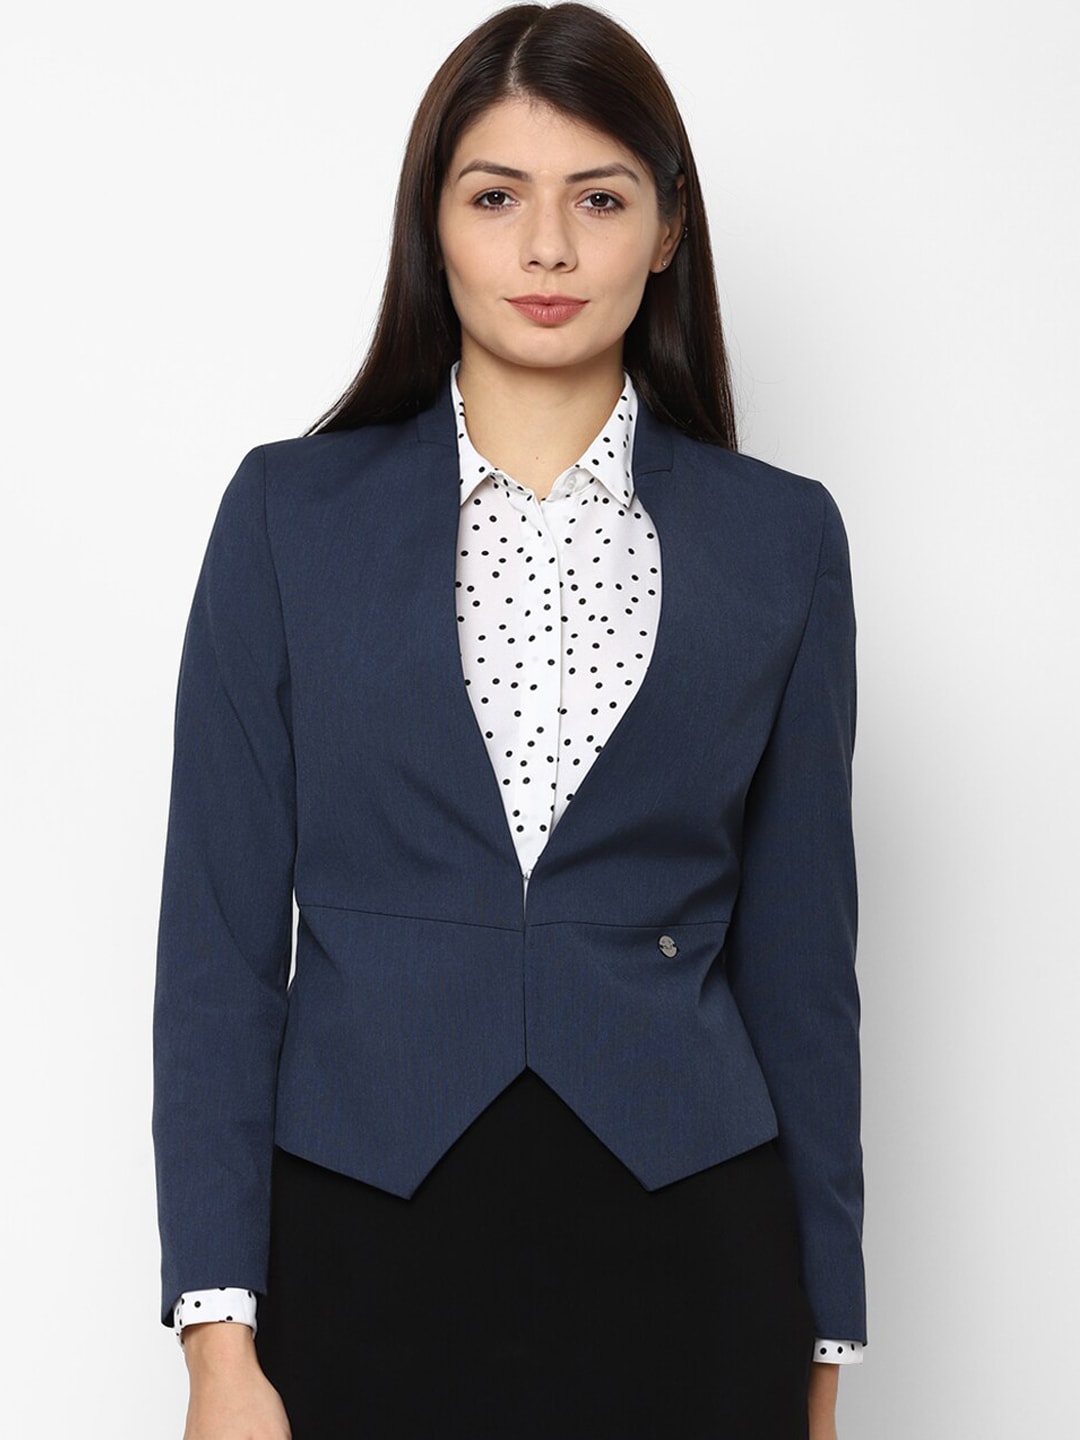 Allen Solly Woman Navy Blue Single-Breasted Blazer Price in India